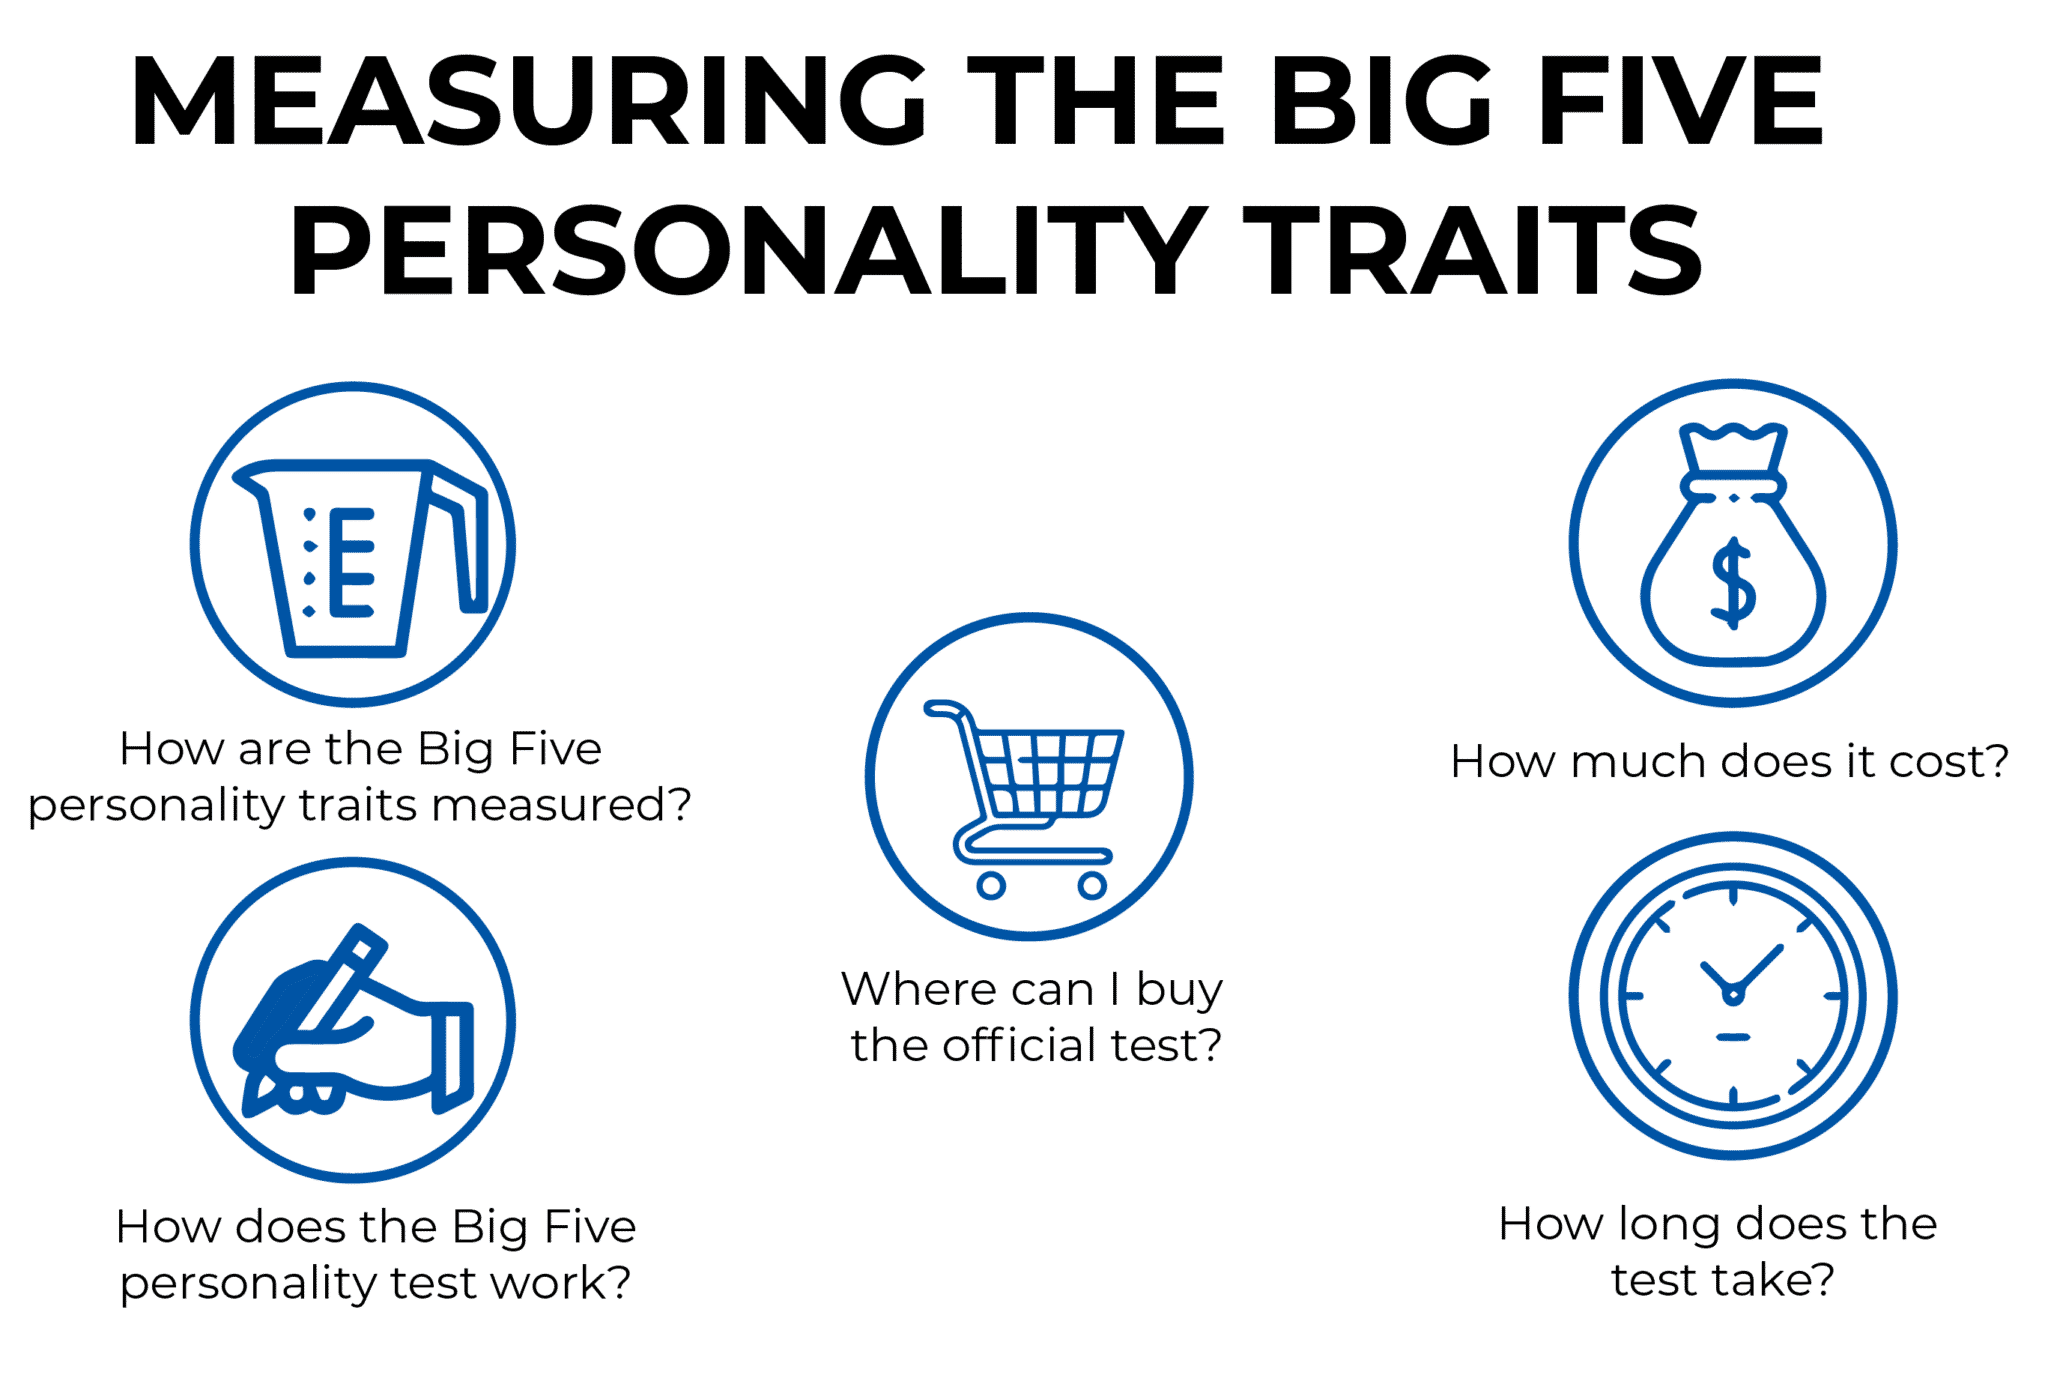 MEASURING THE BIG FIVE PERSONALITY TRAITS